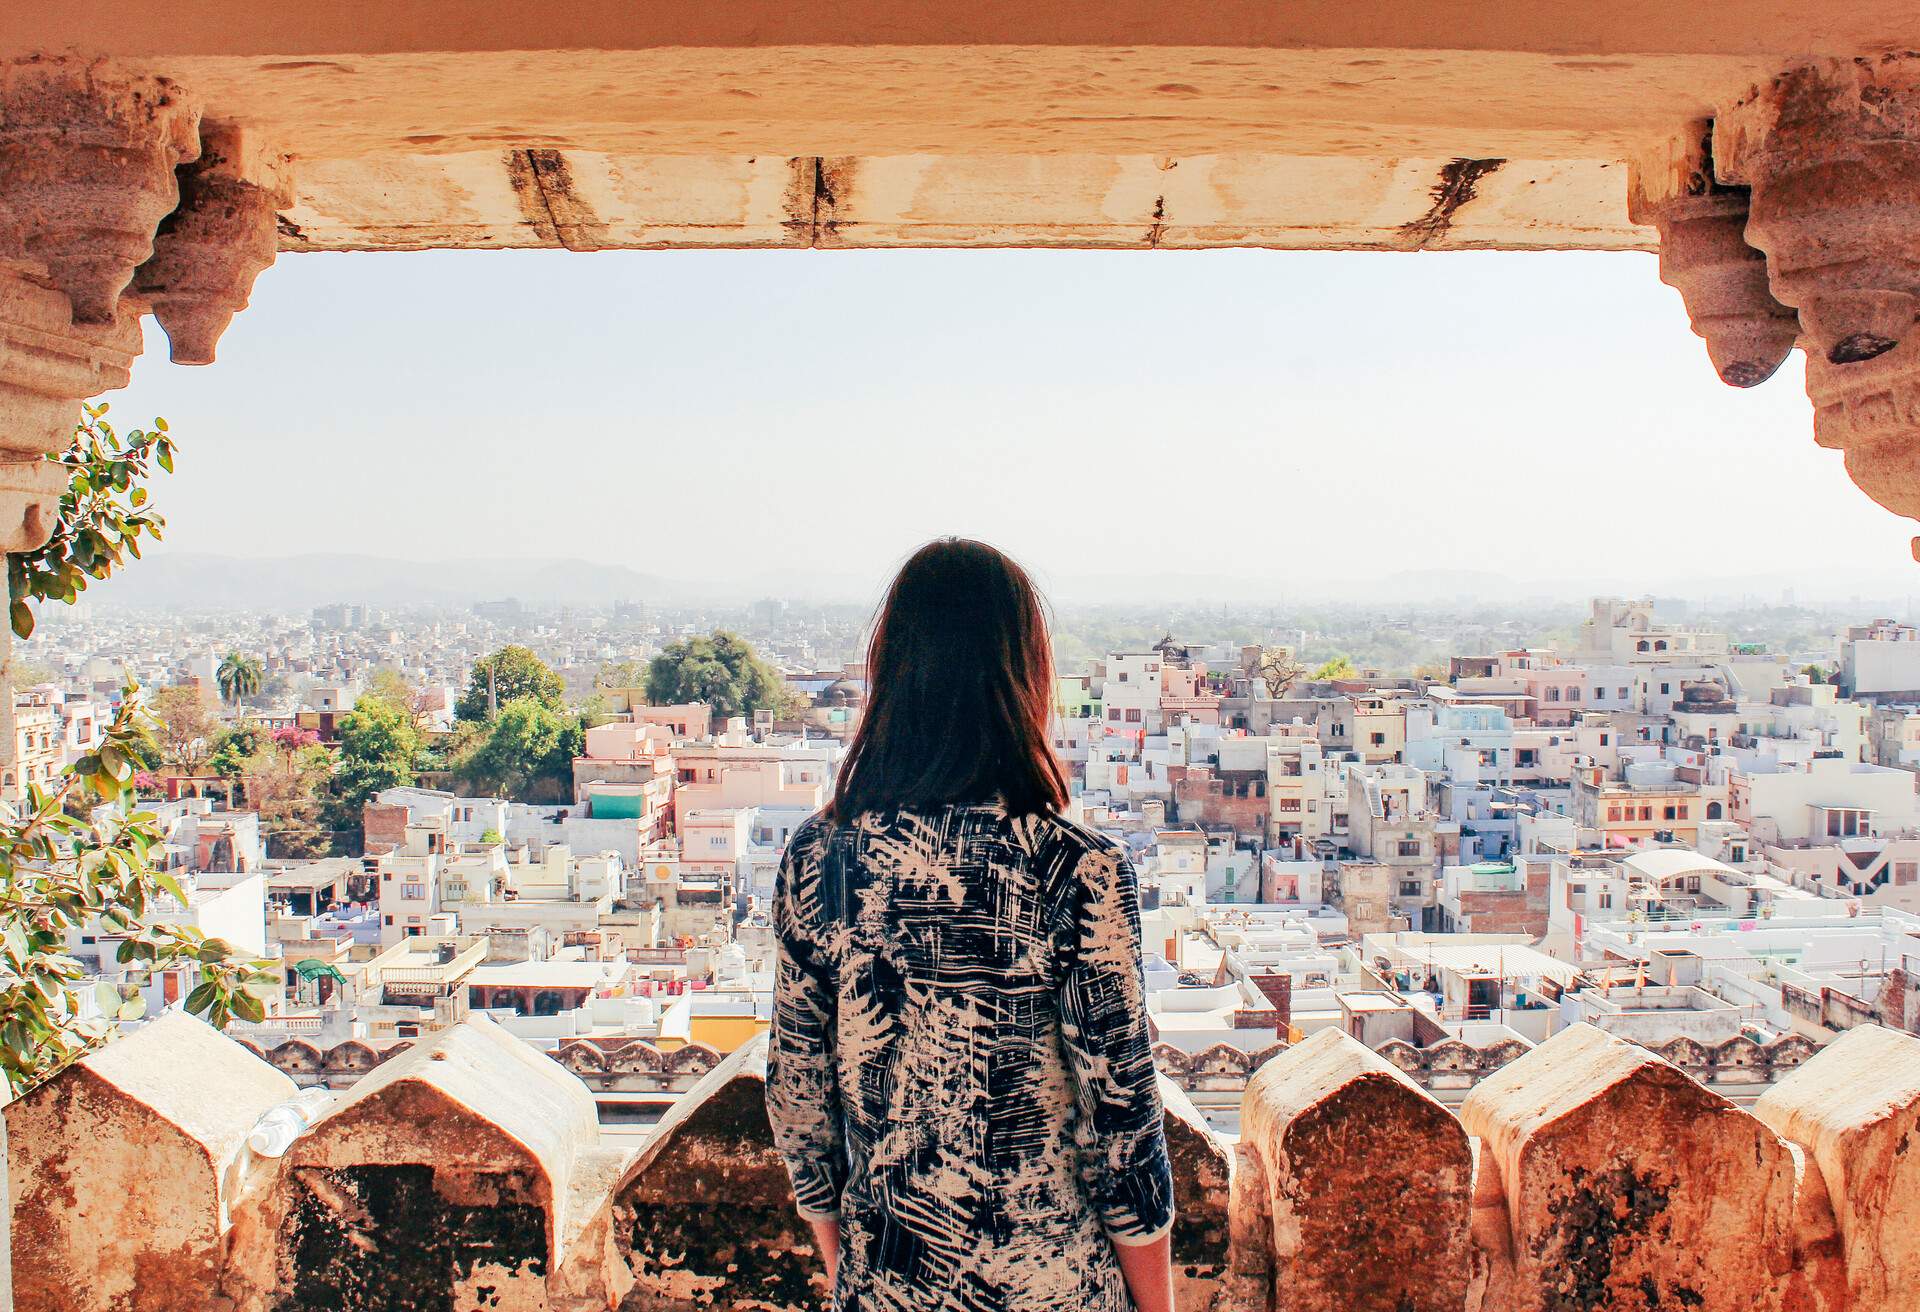 A young woman looks out over the city of Udaipur, Rajasthan, North India